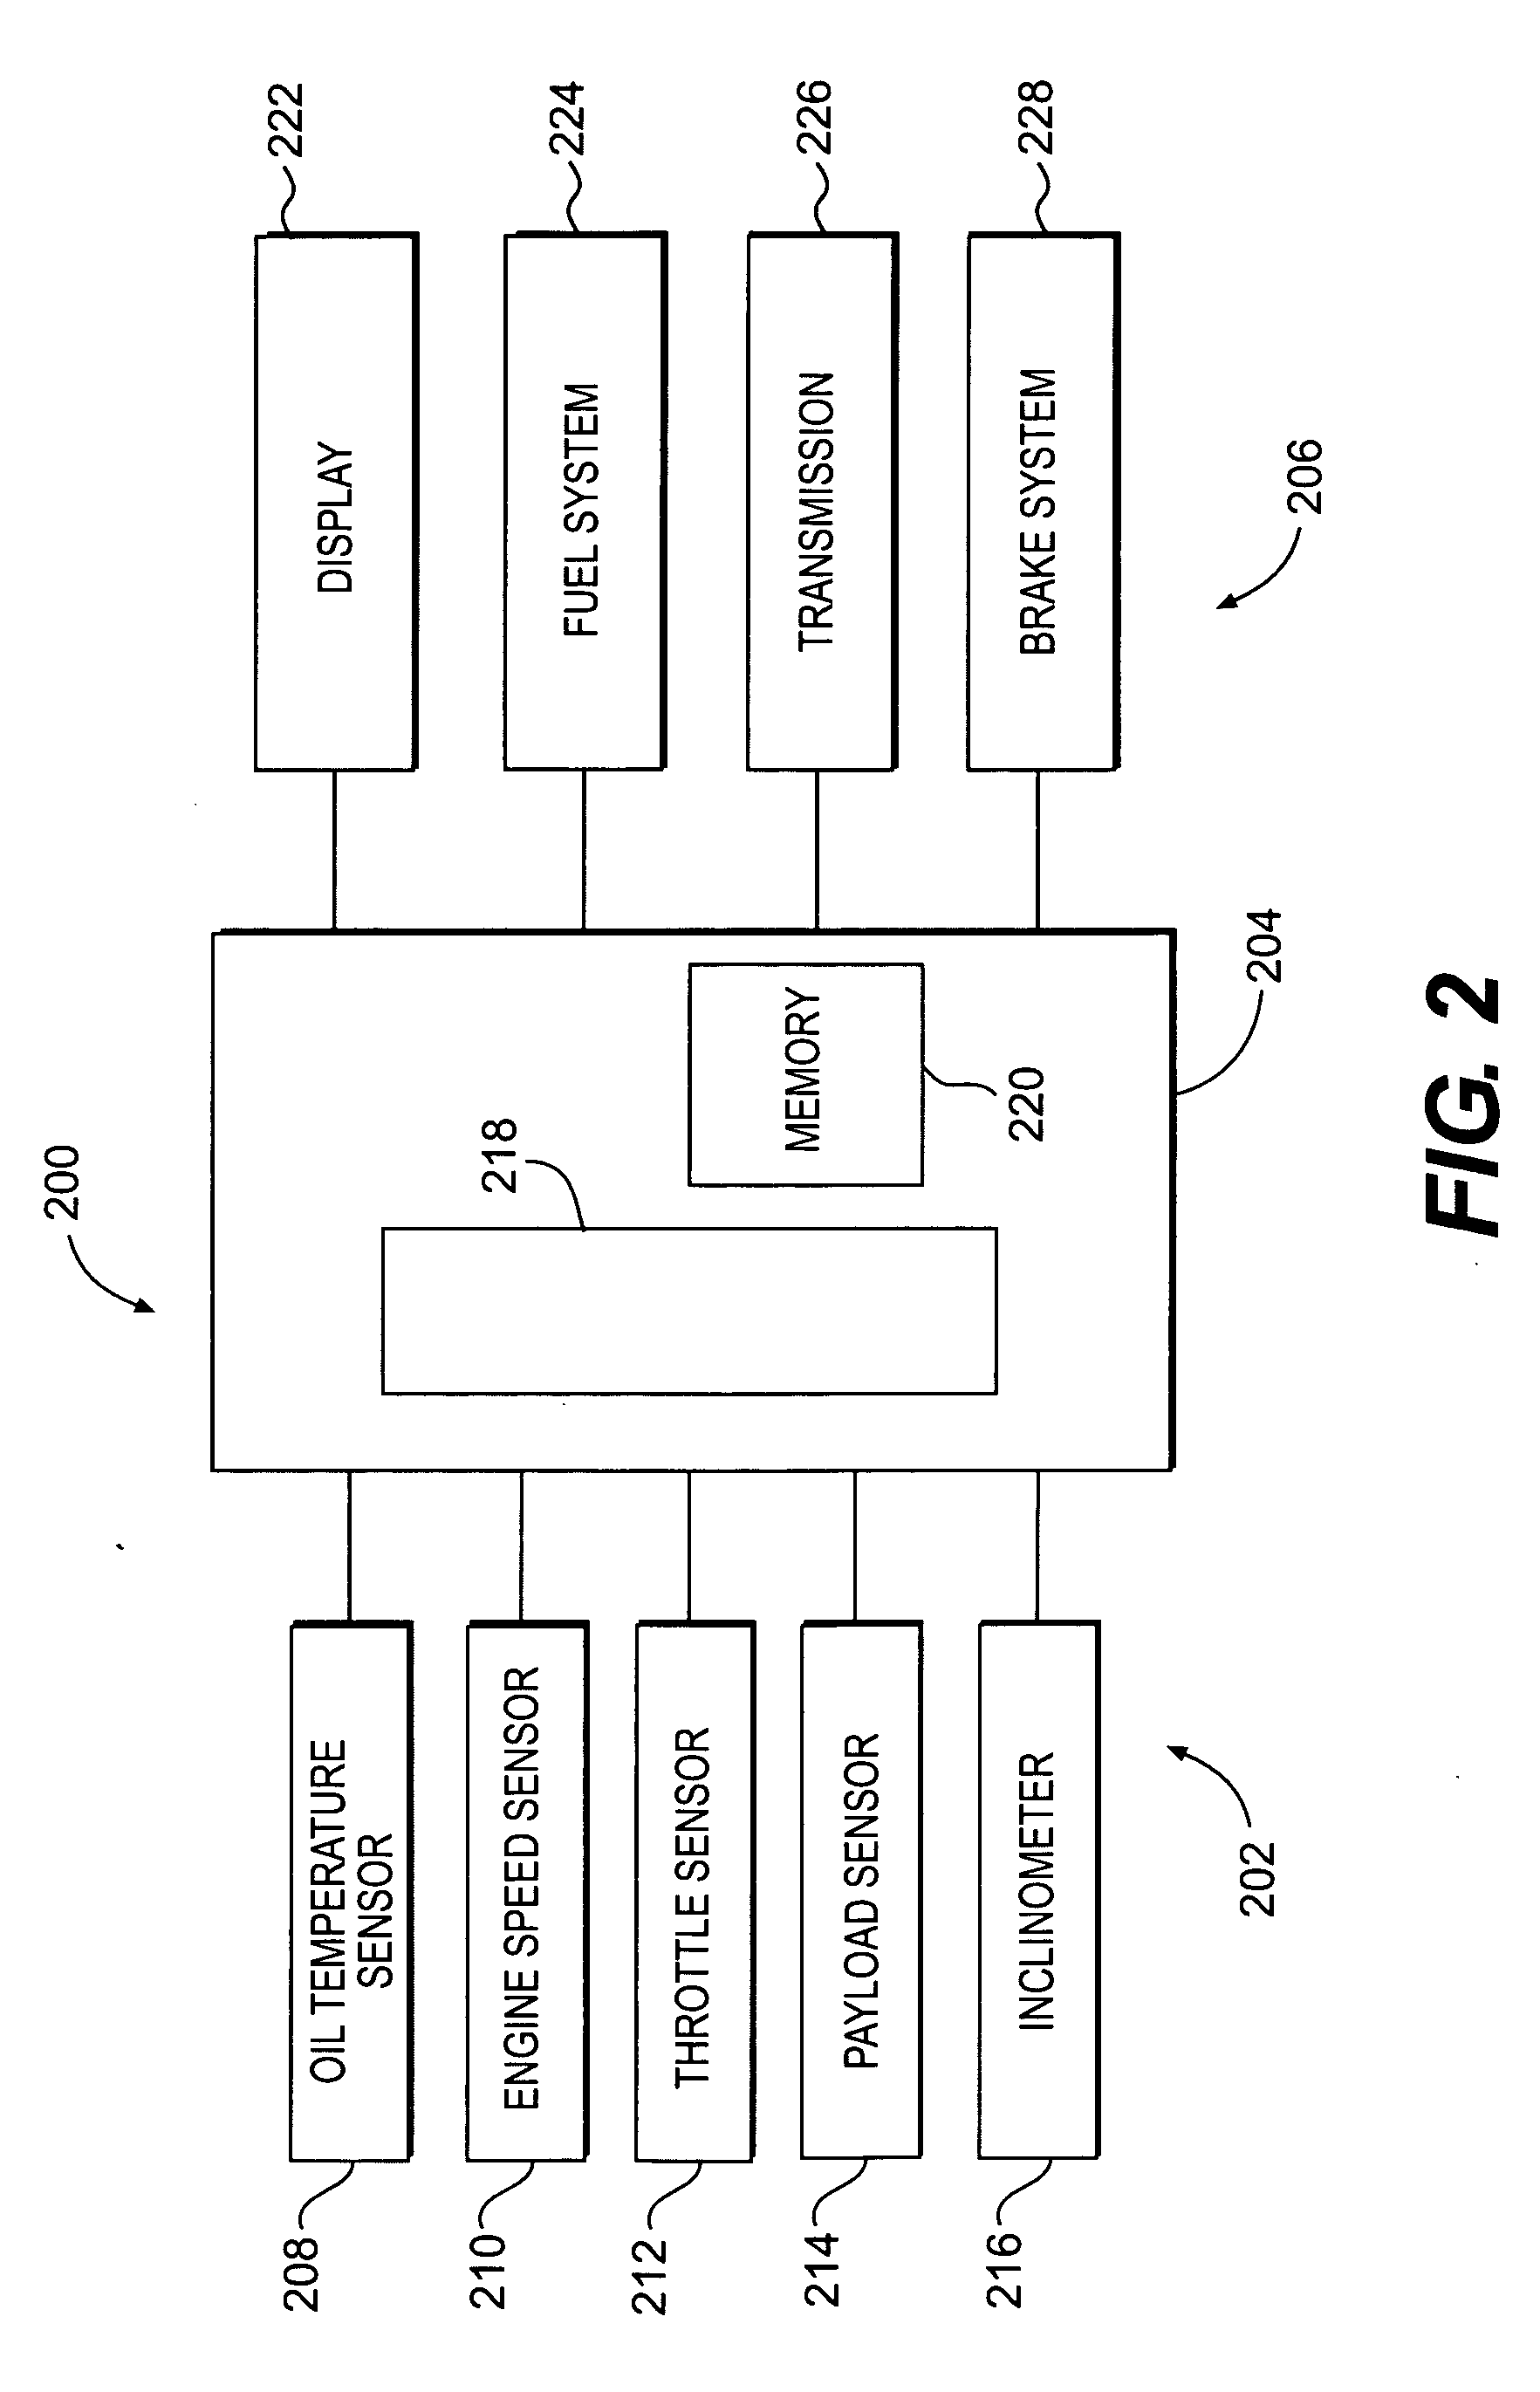 Control system for a load-carrying vehicle